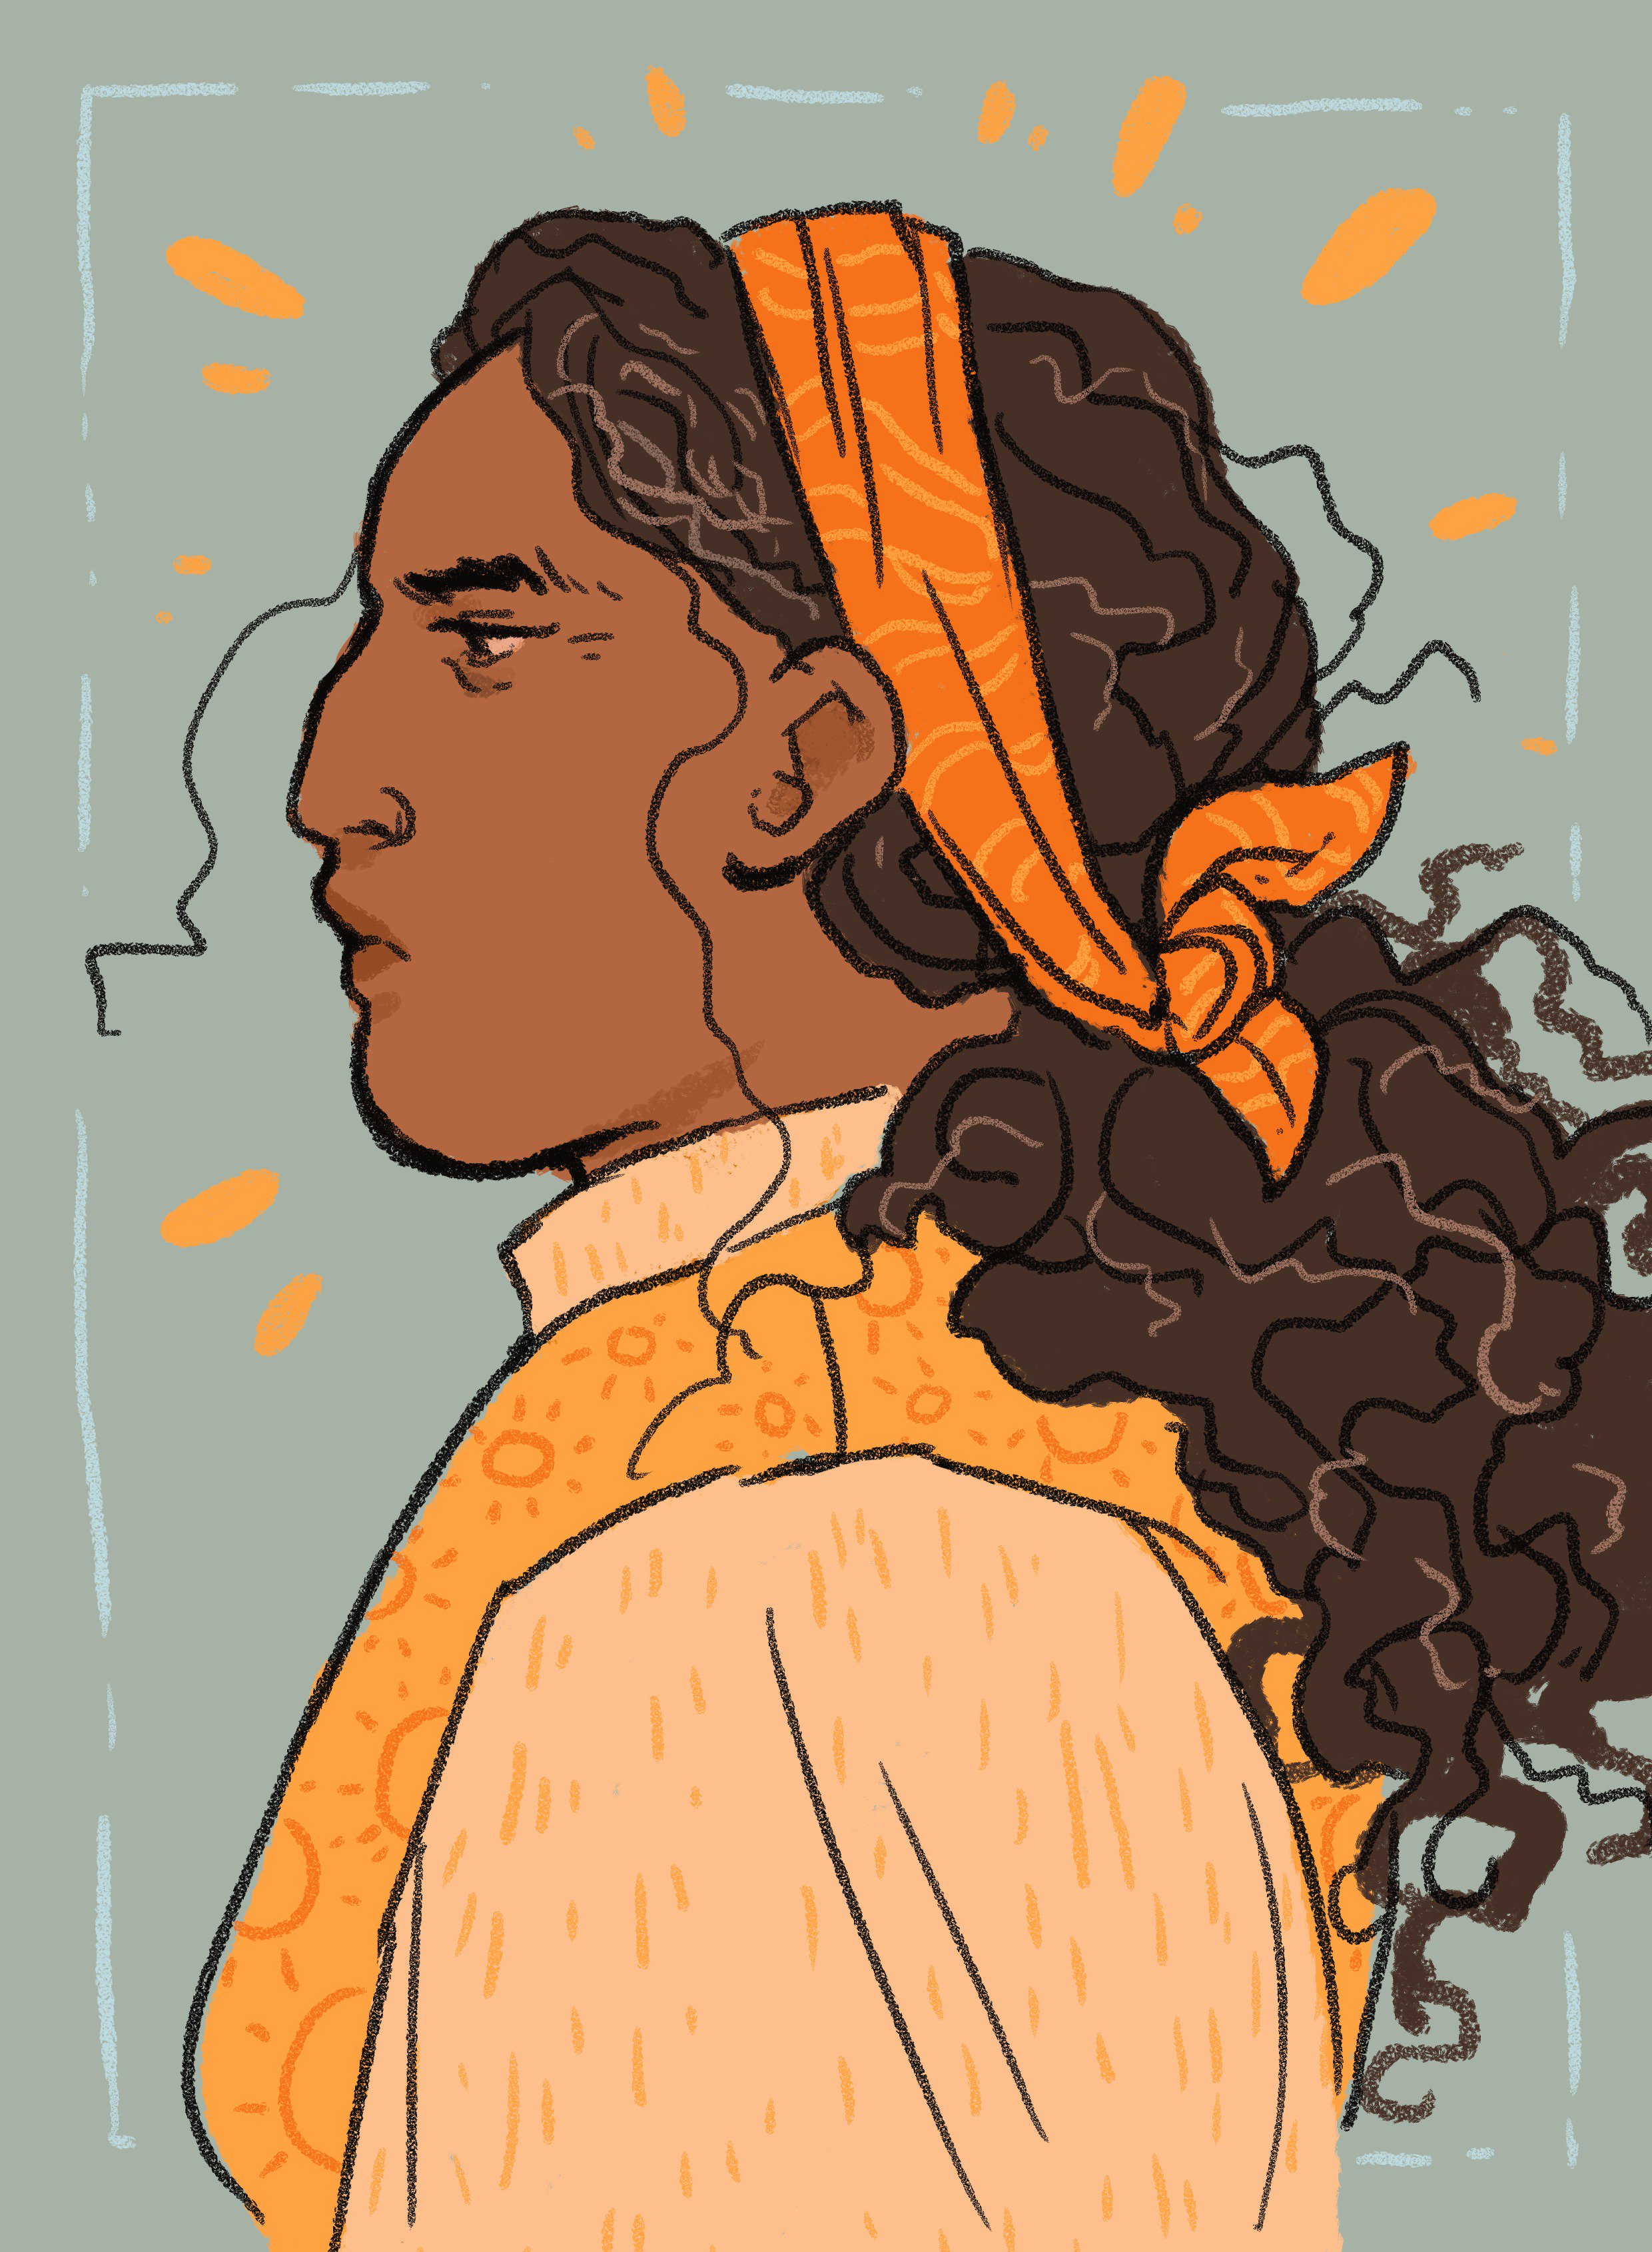 A drawing of a brown-skinned woman in profile, against a grey-blue background. She is drawn from the bust up, facing to the left. She has dark, curly brown hair in a low ponytail, and an orange sash tying it away from her face. Her outfit is yellow and orange, with a sun pattern. Her expression is neutral, her nose aquiline, and she has small wrinkles at the corners of her eyes.